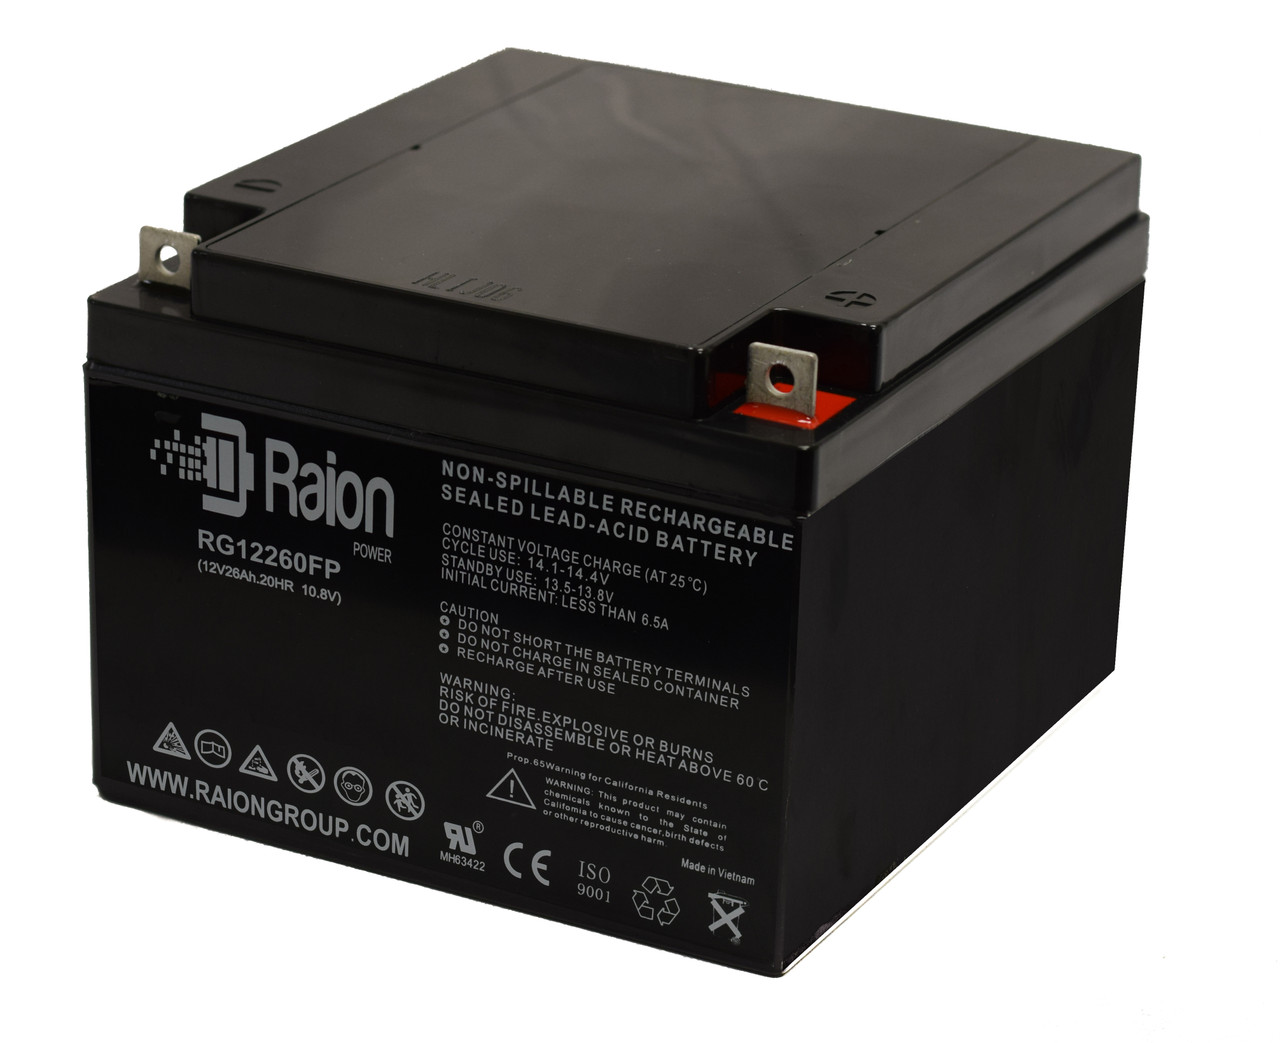 Raion Power Replacement 12V 26Ah Battery for Tempest TR26-12C - 1 Pack